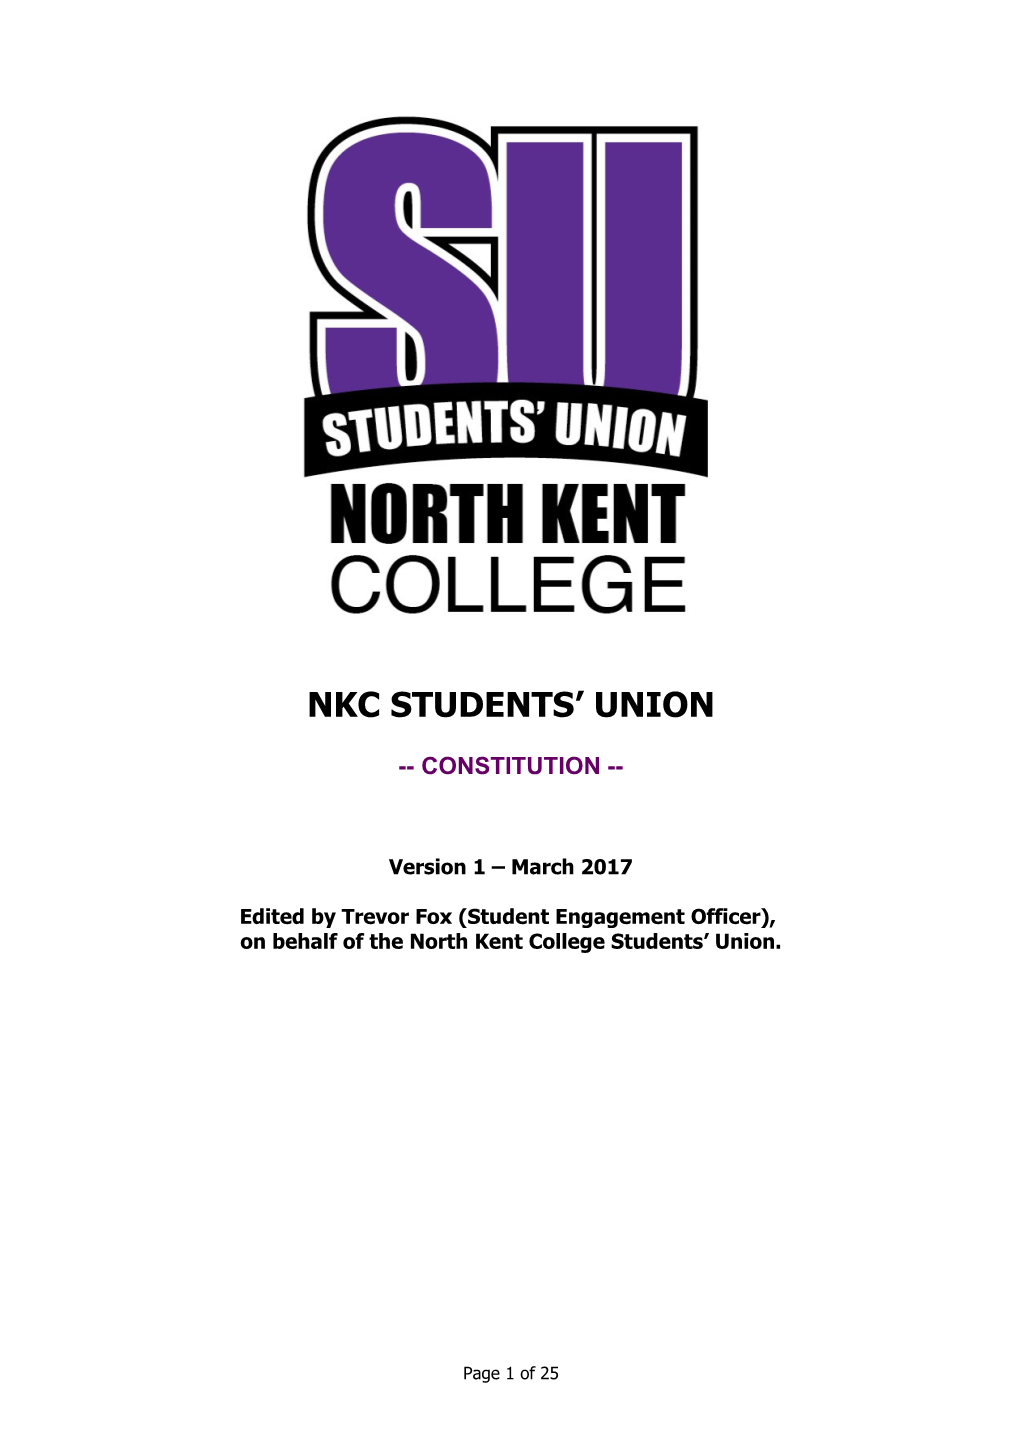 On Behalf of the North Kent College Students Union